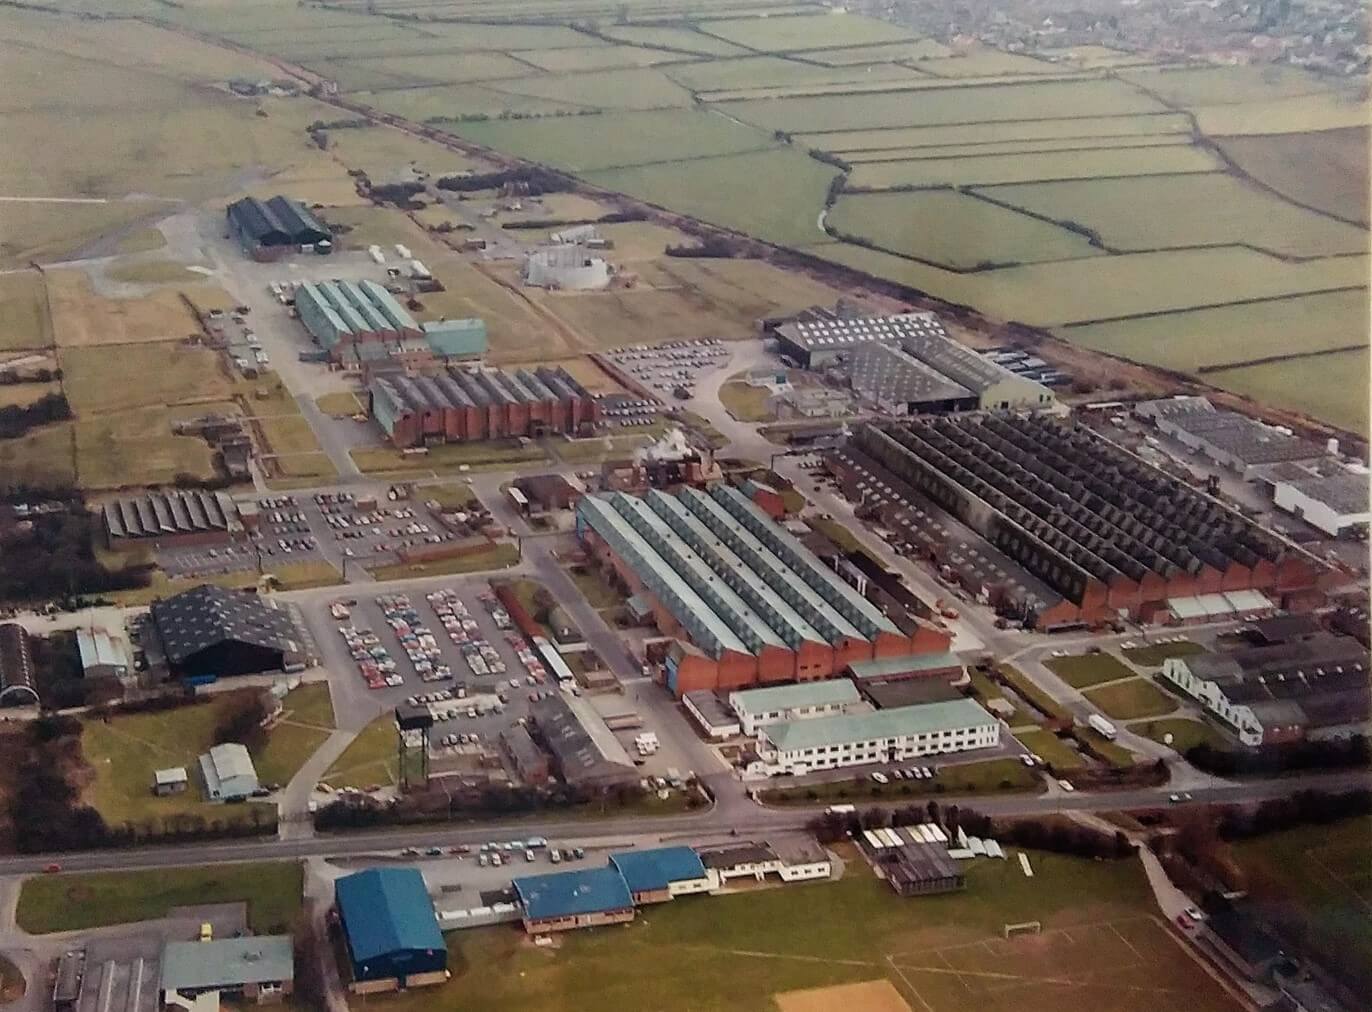 the factory became the Weston division of Westland Helicopters in 1960.